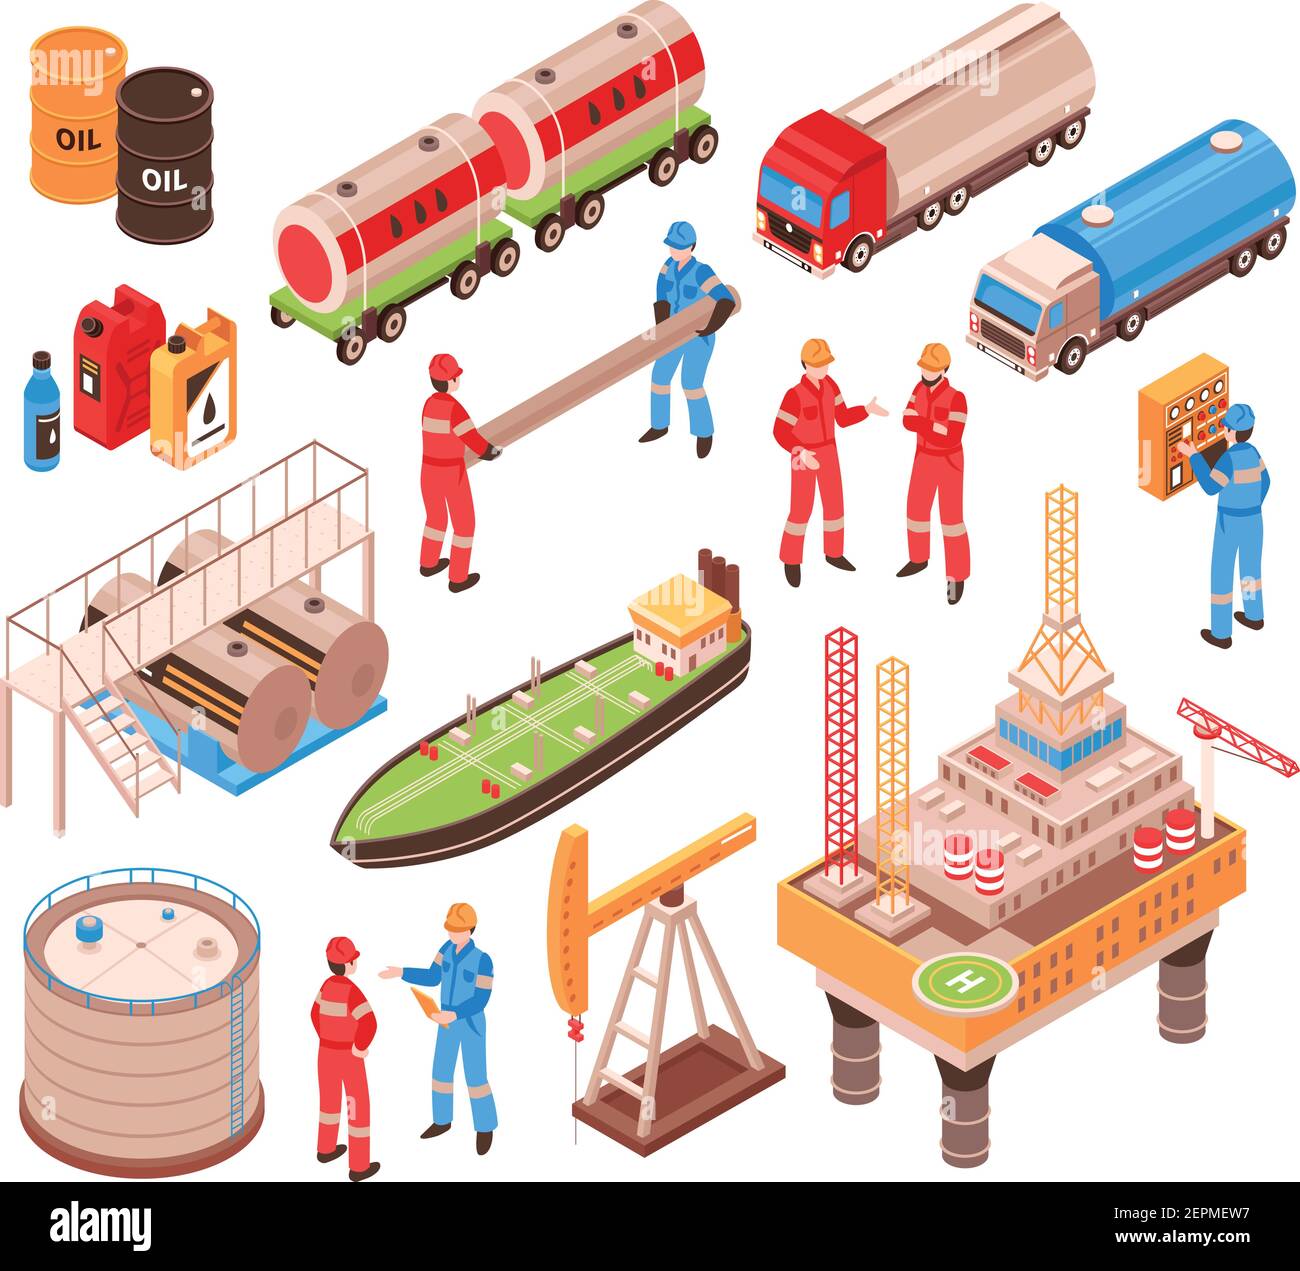 Oil gas industry isometric icons set with offshore drilling platform rail tank car truck vessel isolated vector illustration Stock Vector